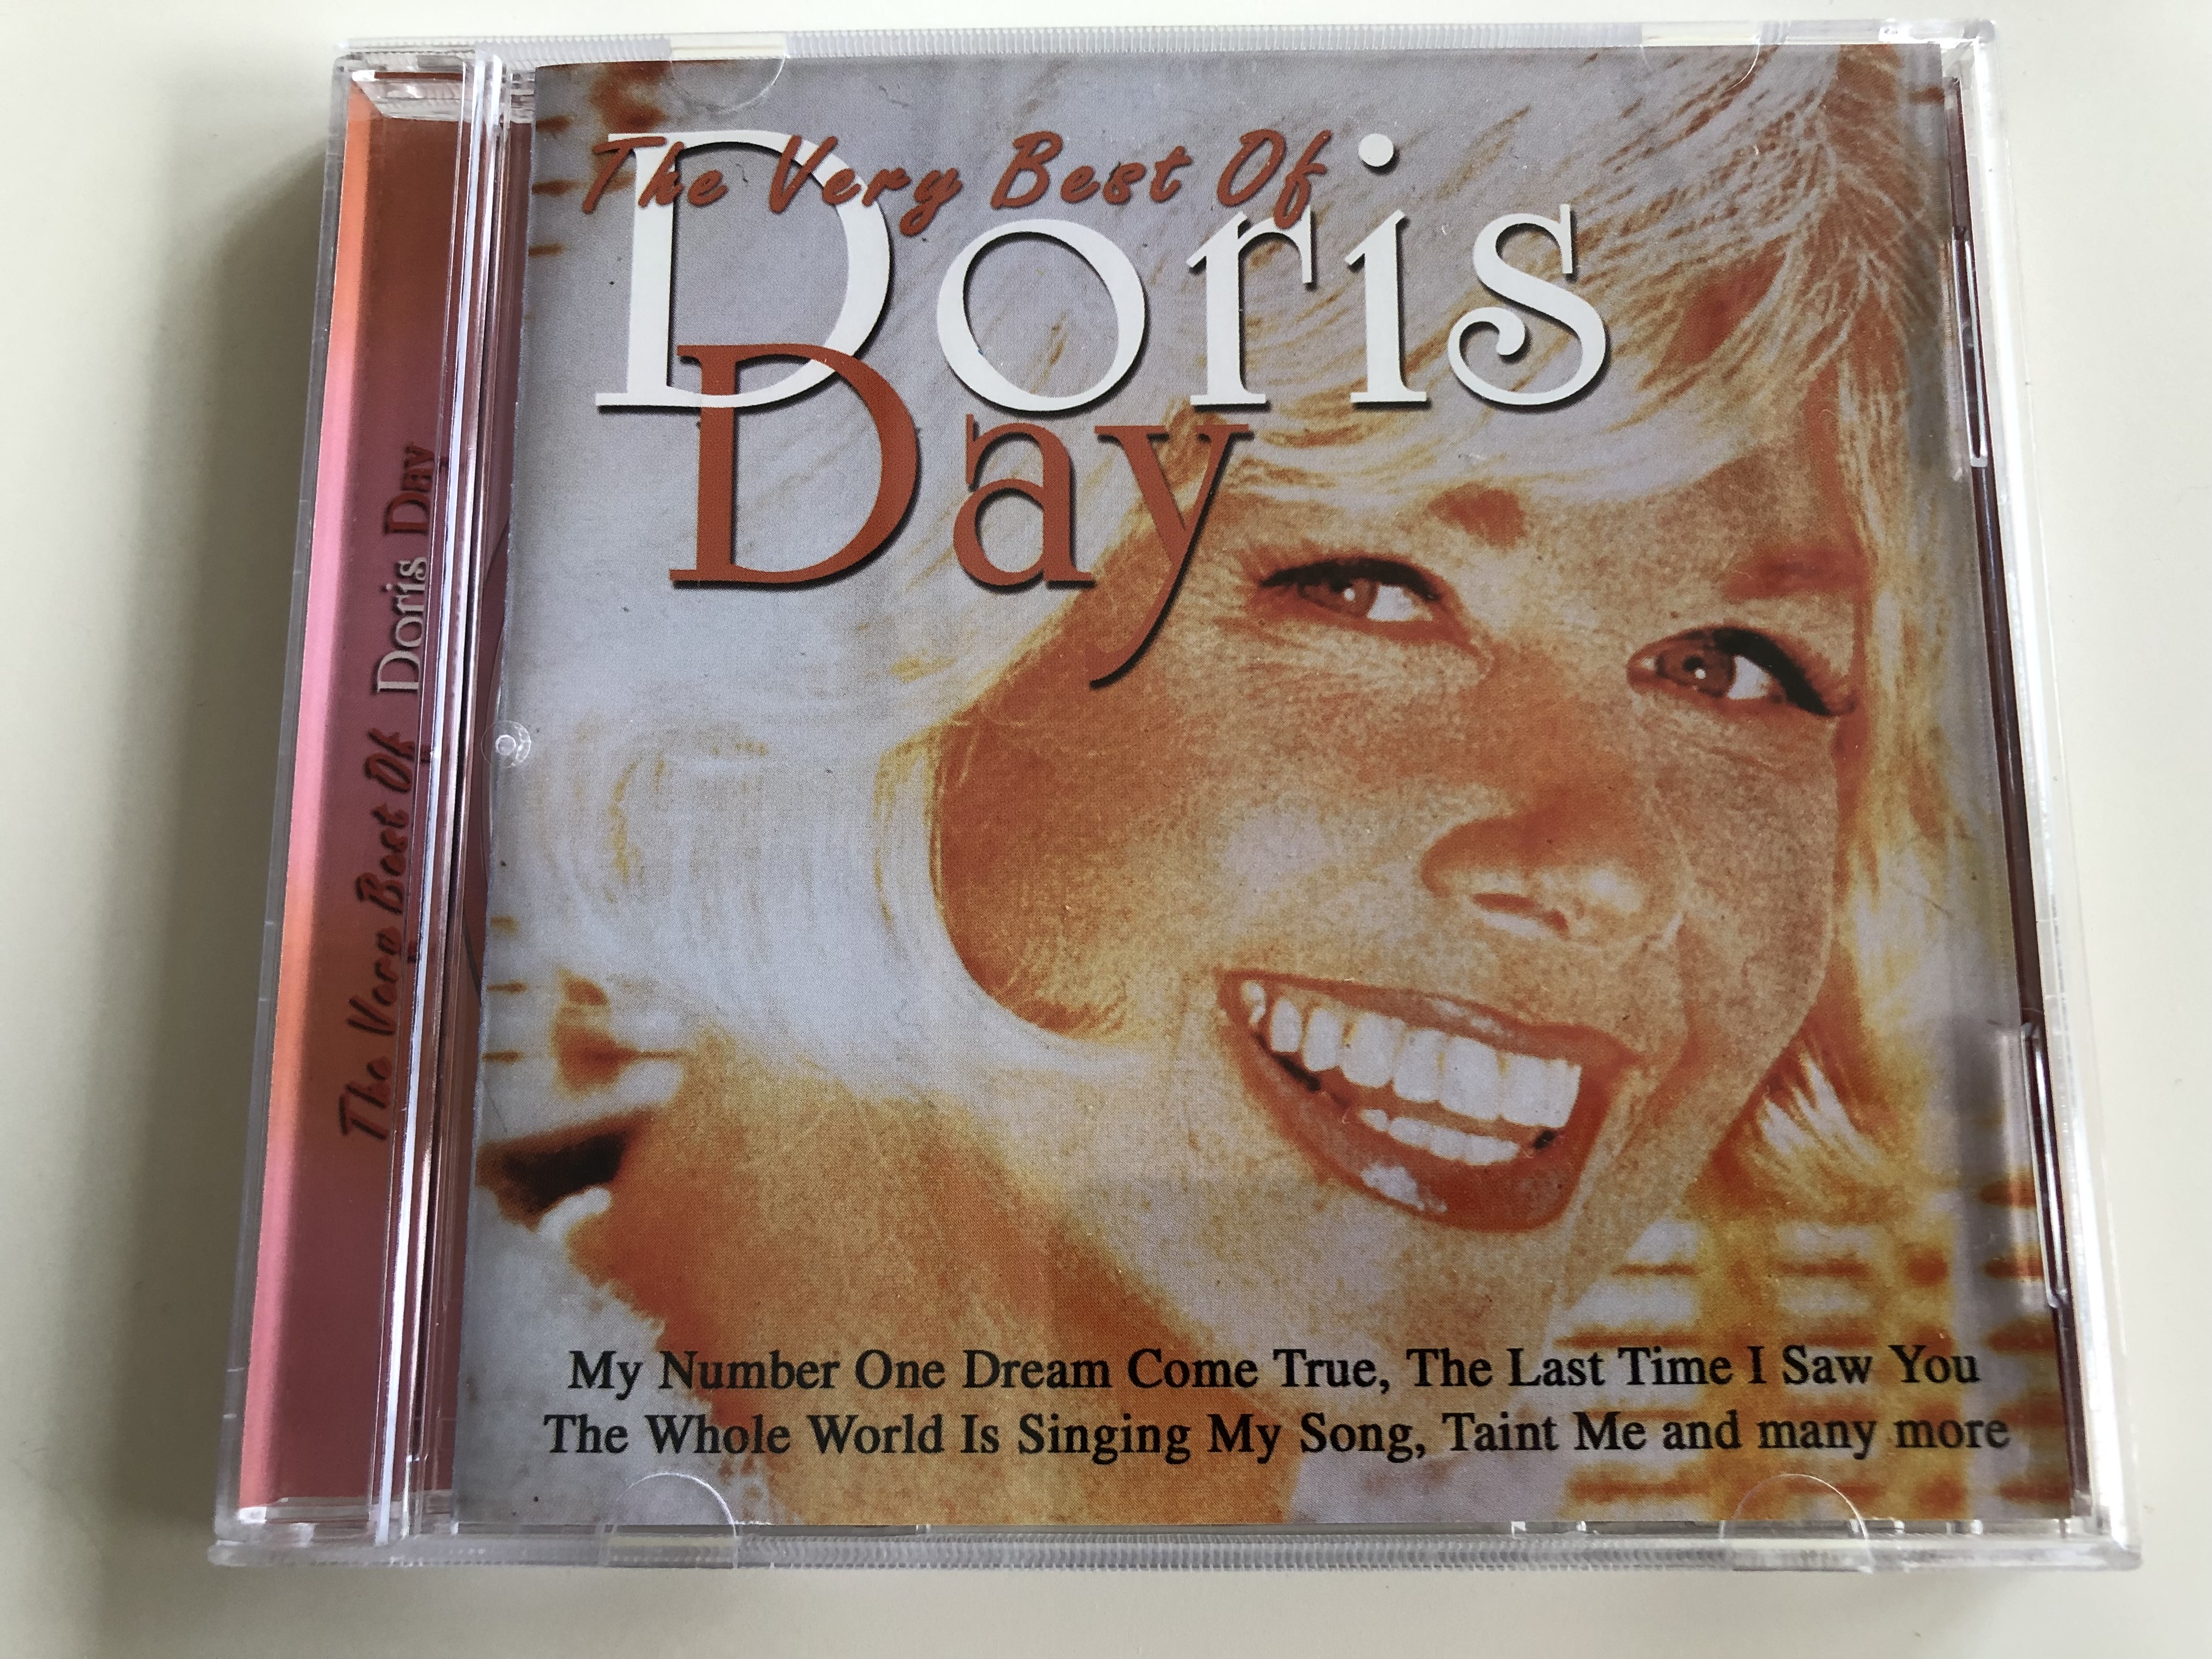 the-very-best-of-doris-day-my-number-one-dream-come-true-the-last-time-i-saw-you-the-whole-world-is-singing-my-song-audio-cd-2001-musicbank-apwcd115-1-.jpg